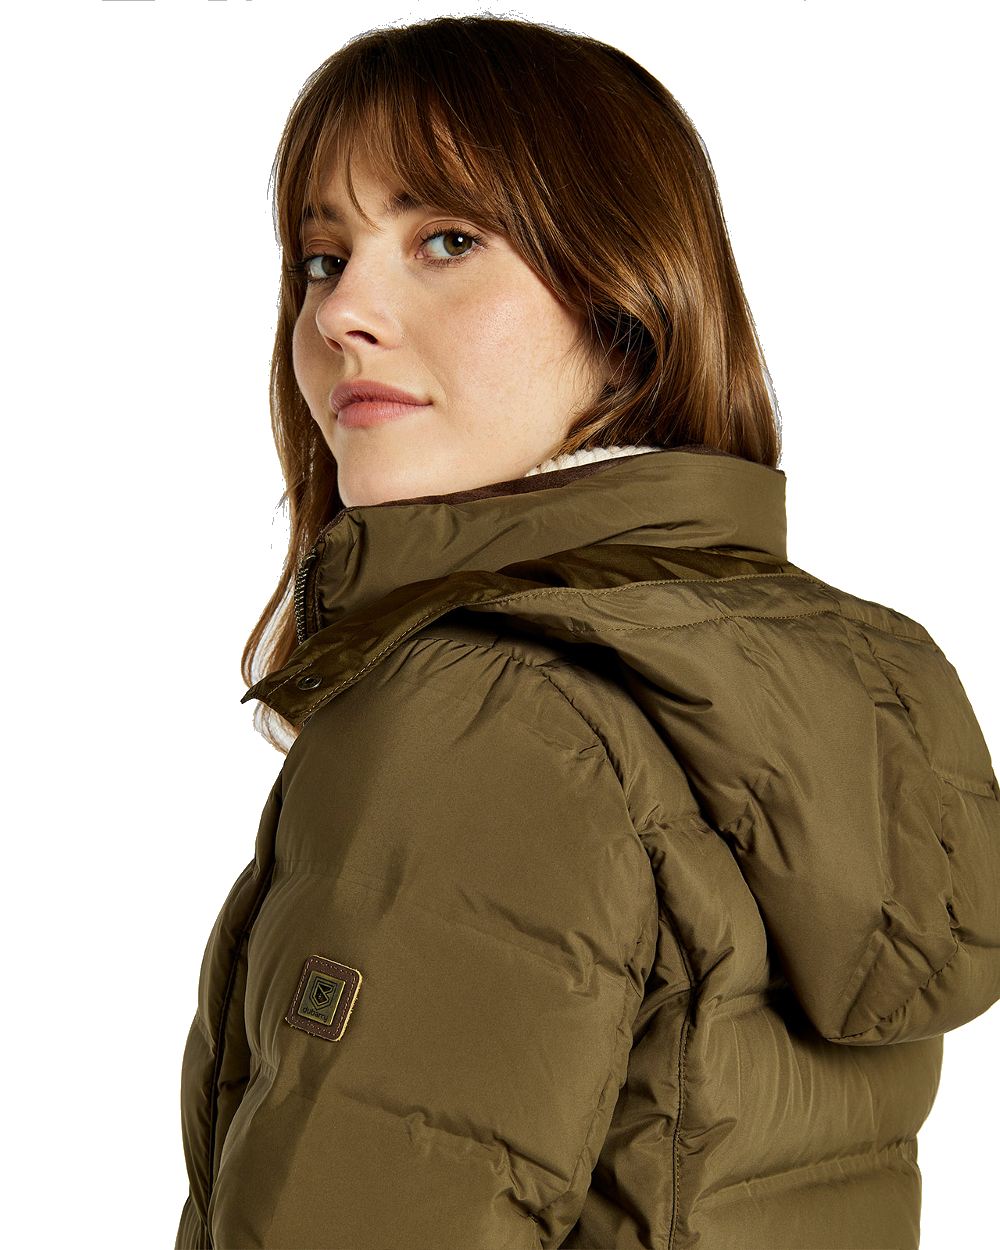 Dubarry Ballybrophy Quilted Jacket in Breen 